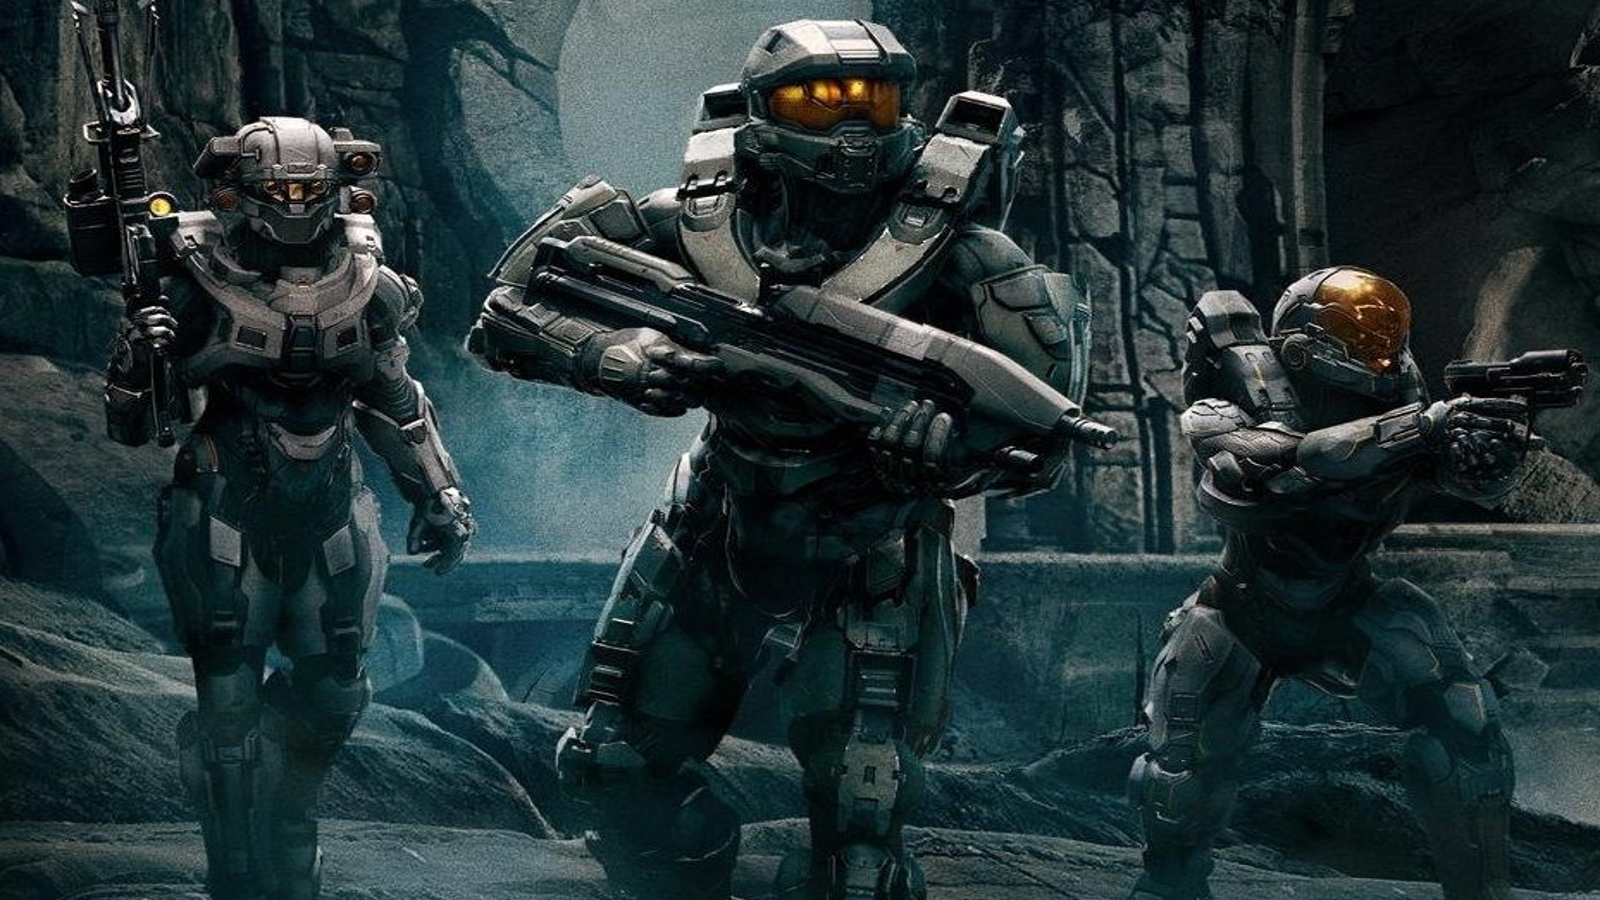 Take a peek at the Halo TV series' latest trailer